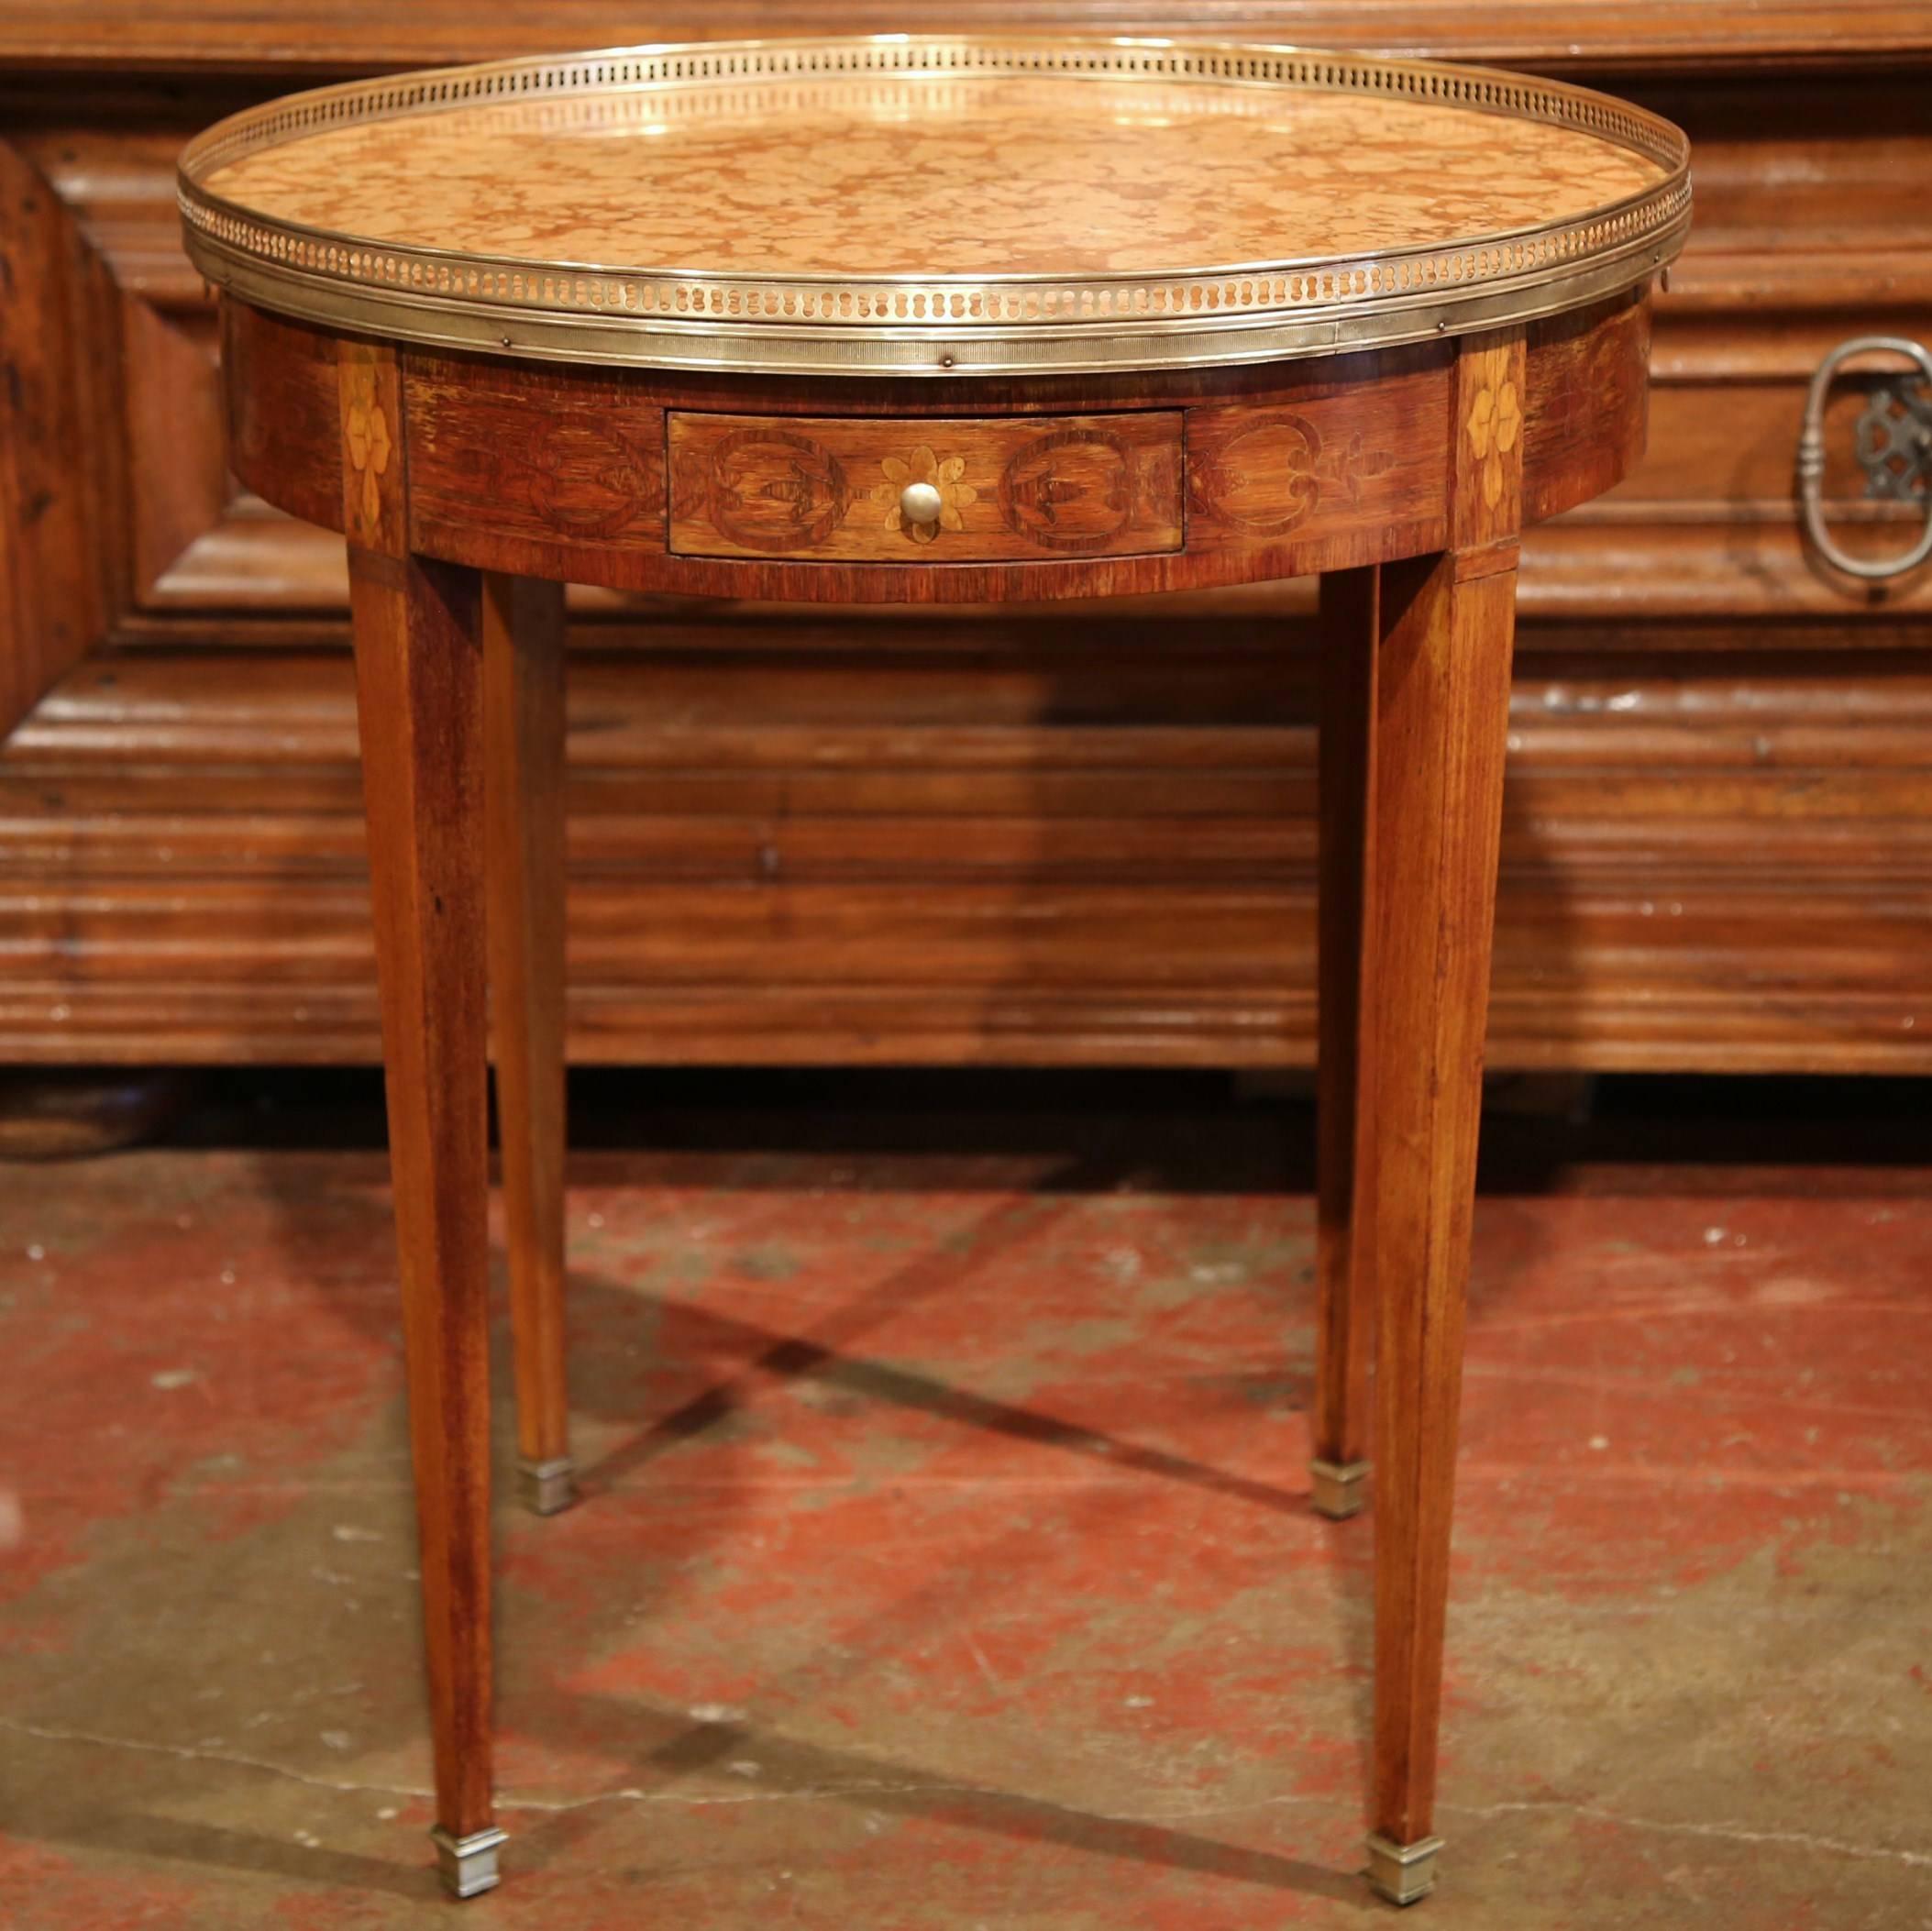 Use this elegant, antique fruit wood table as an occasional side table in a living room, crafted in France, circa 1890, the inlay table bouillotte features detailed marquetry work around the apron embellished with a pair of frieze drawers and two